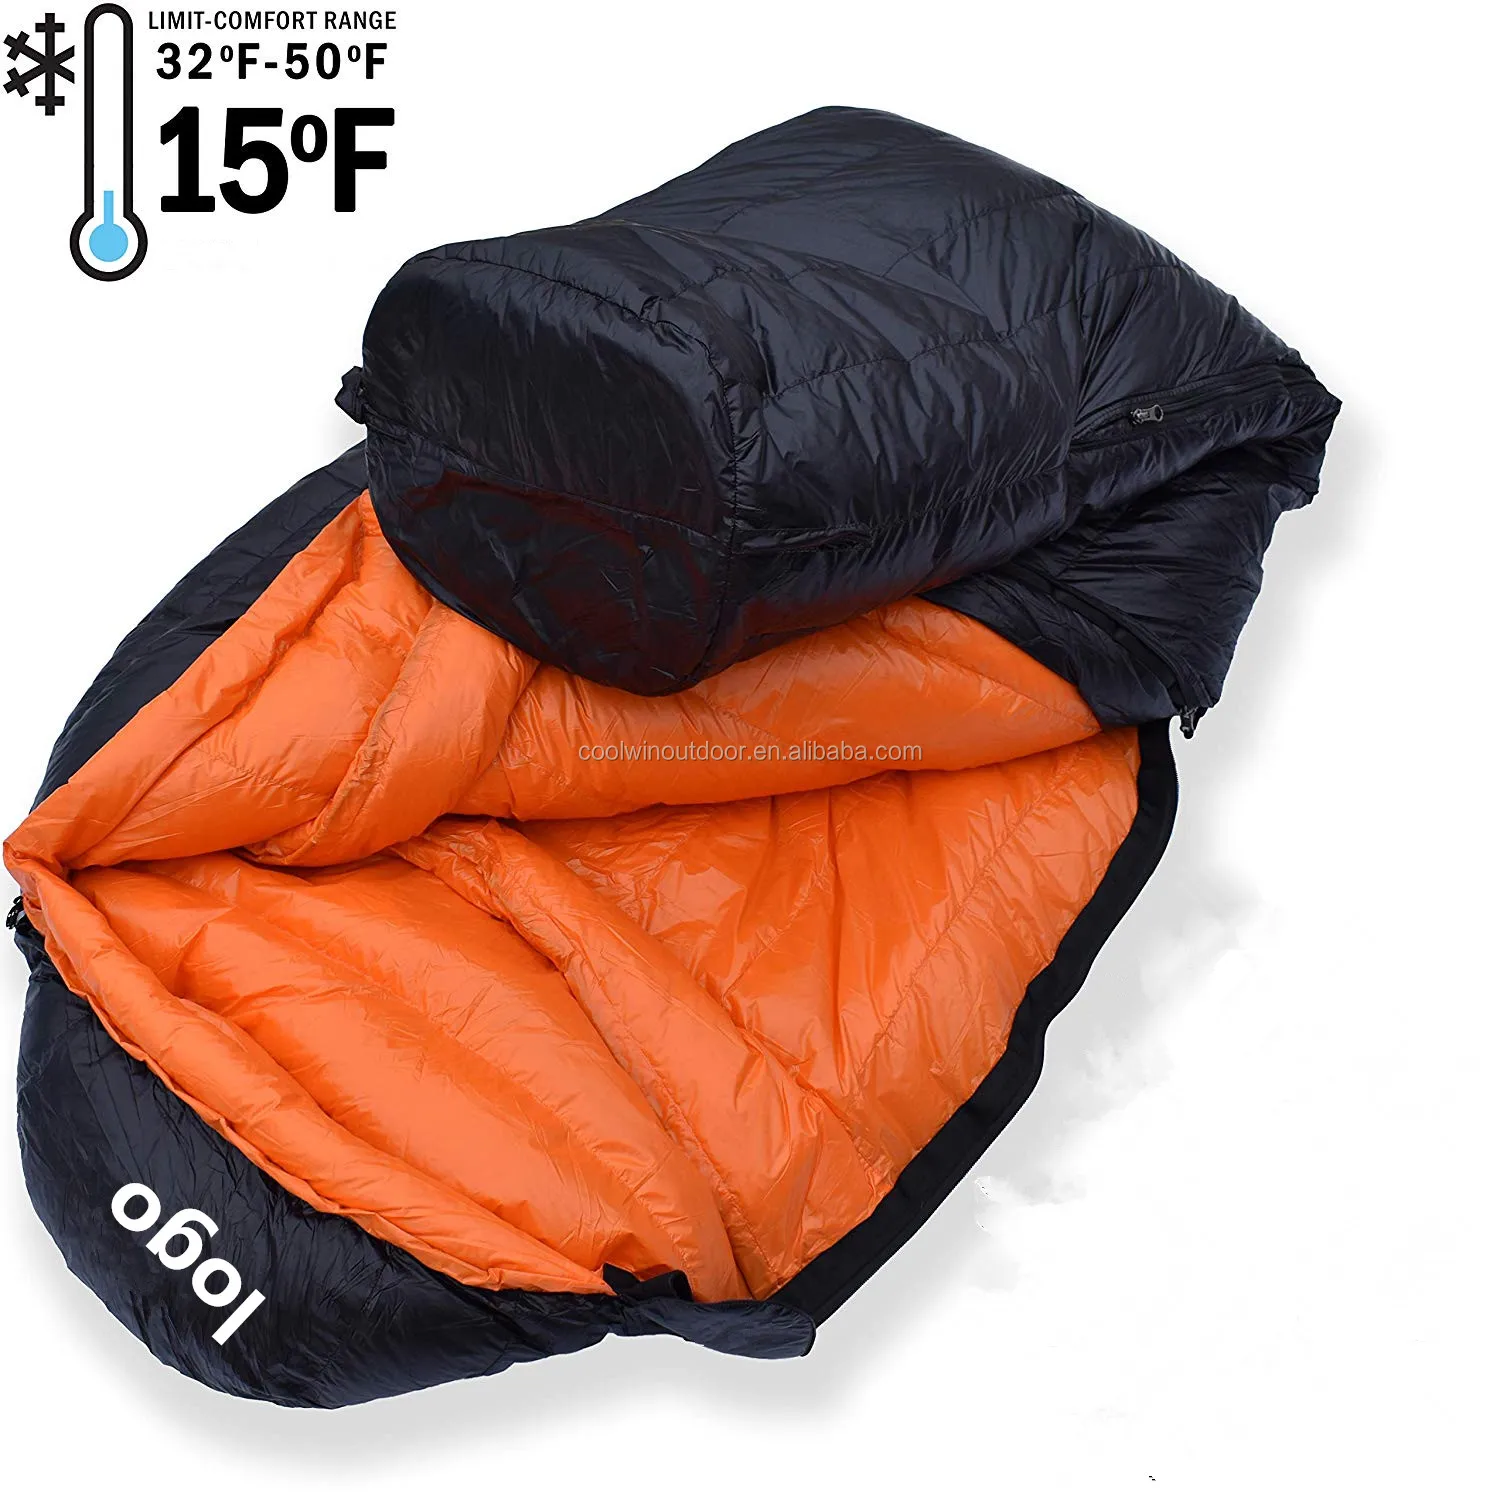 Jungle King duck down sleeping bag-25 degrees Waterproof Outdoor mountain  tourism Arctic extreme cold duck down camping 1.8 kg - AliExpress